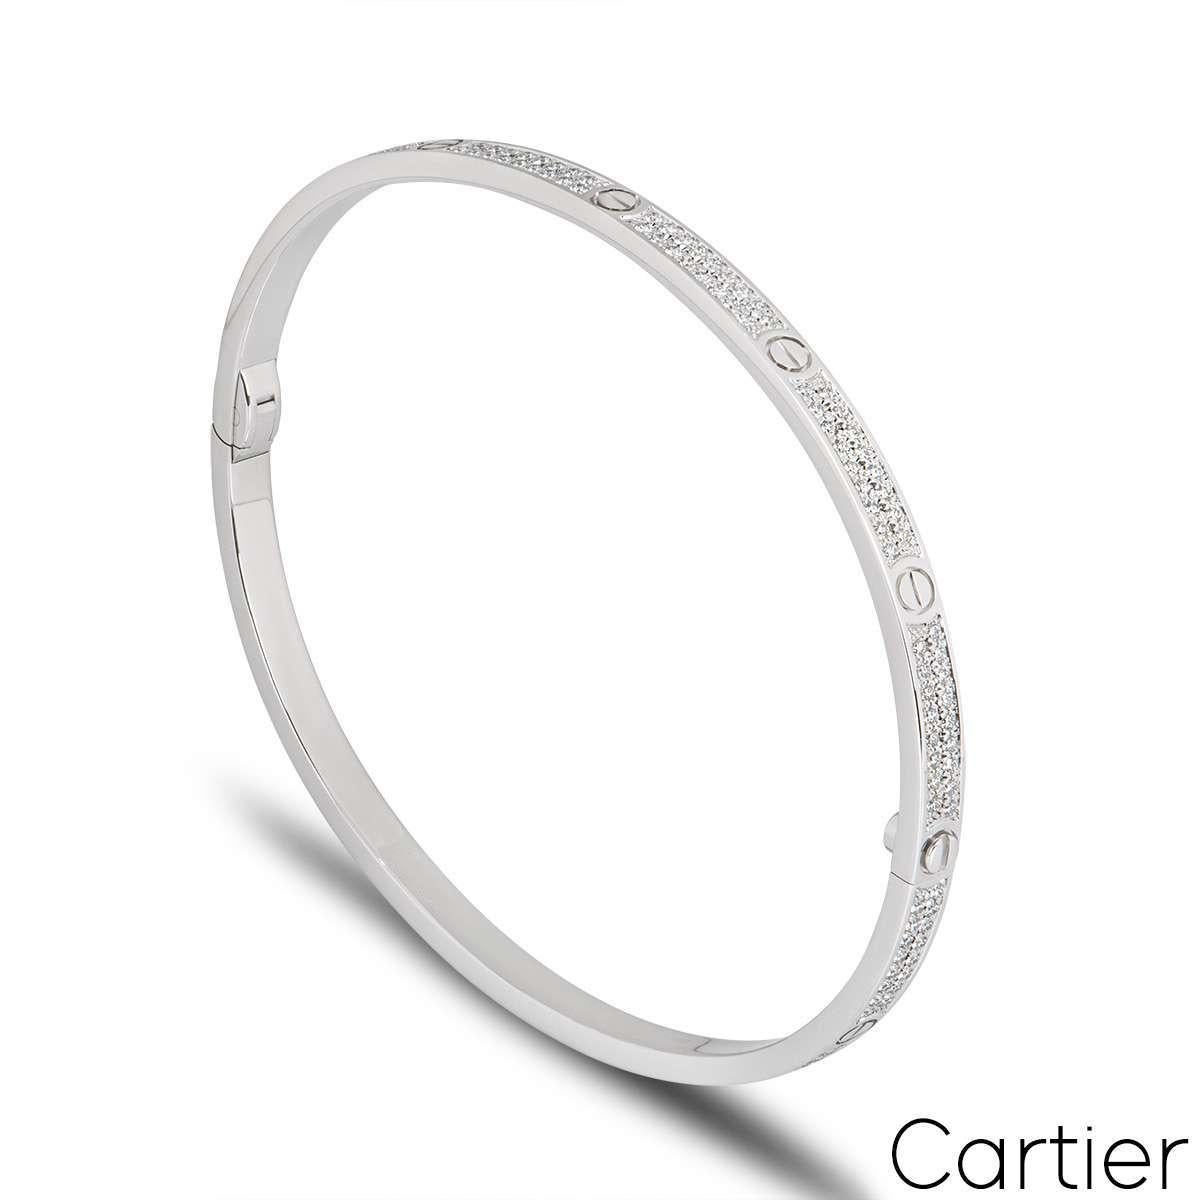 An 18k white gold diamond Cartier bracelet from the Love collection. Comprising of the iconic screw motifs, this bracelet is complemented with 177 round brilliant cut pave set diamonds which have a total weight of 0.95ct. The bracelet is a size 19,